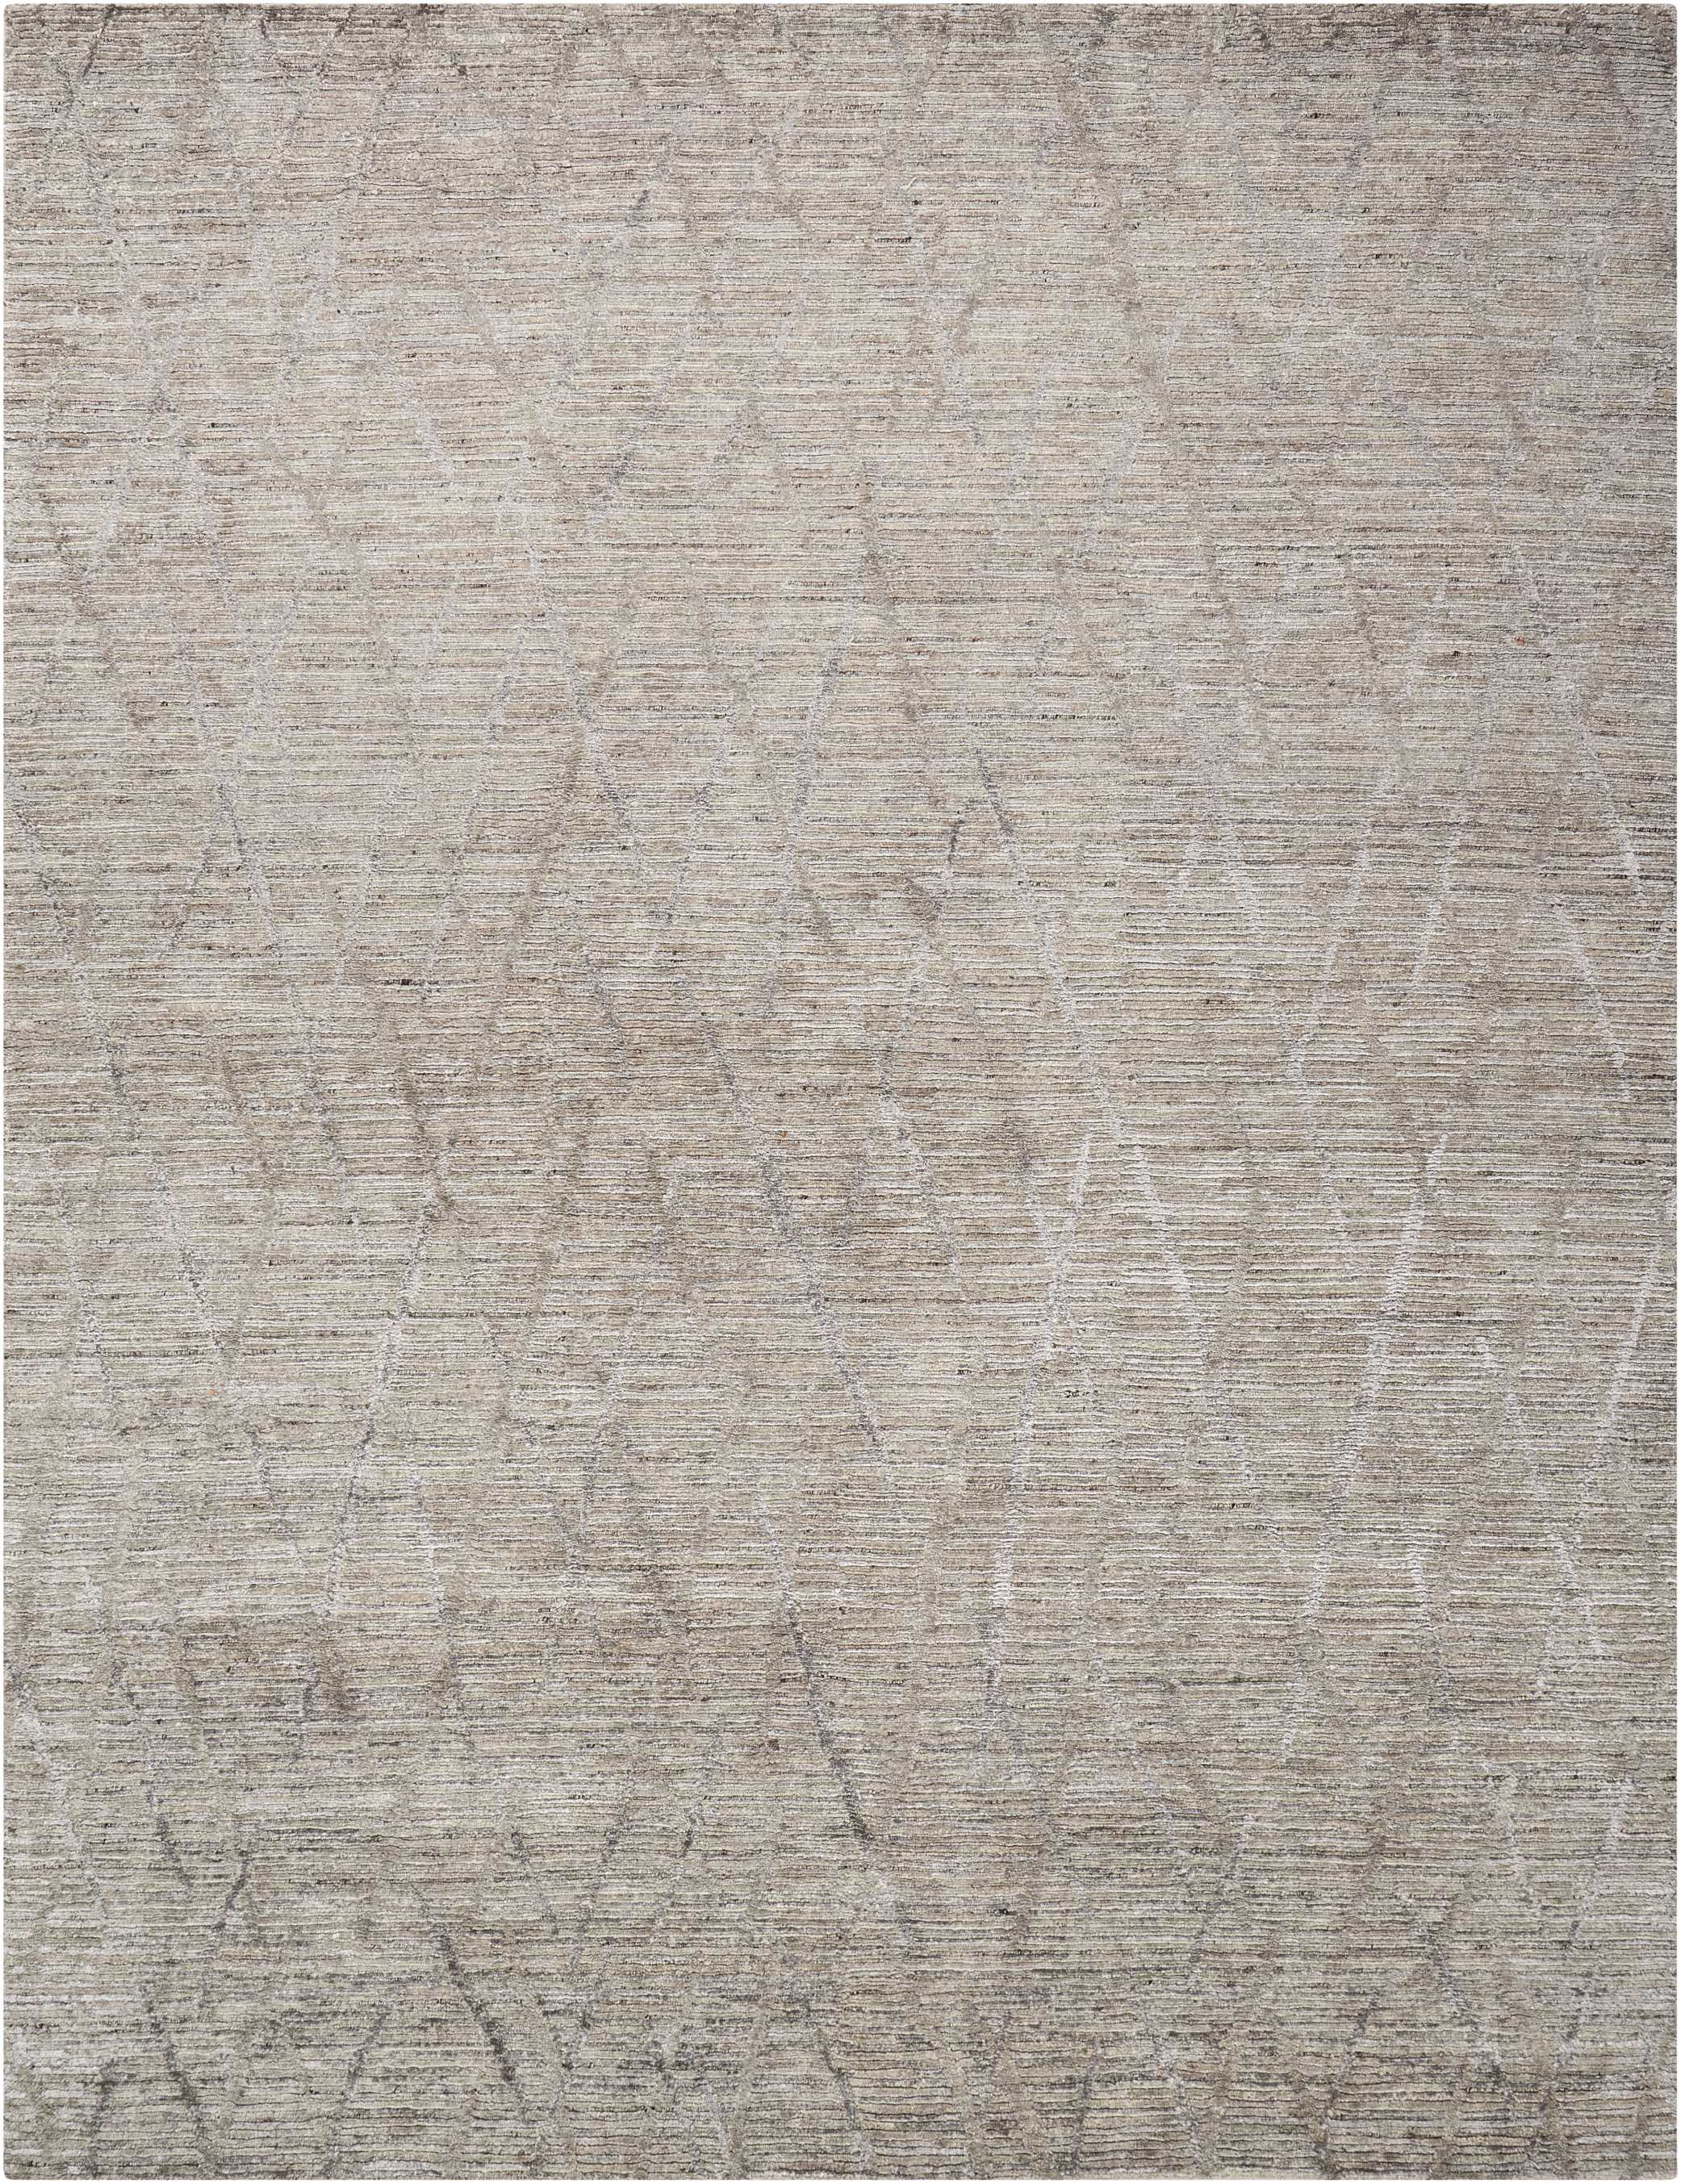 Subtle, textured woven fabric in beige with minimalist linear pattern.